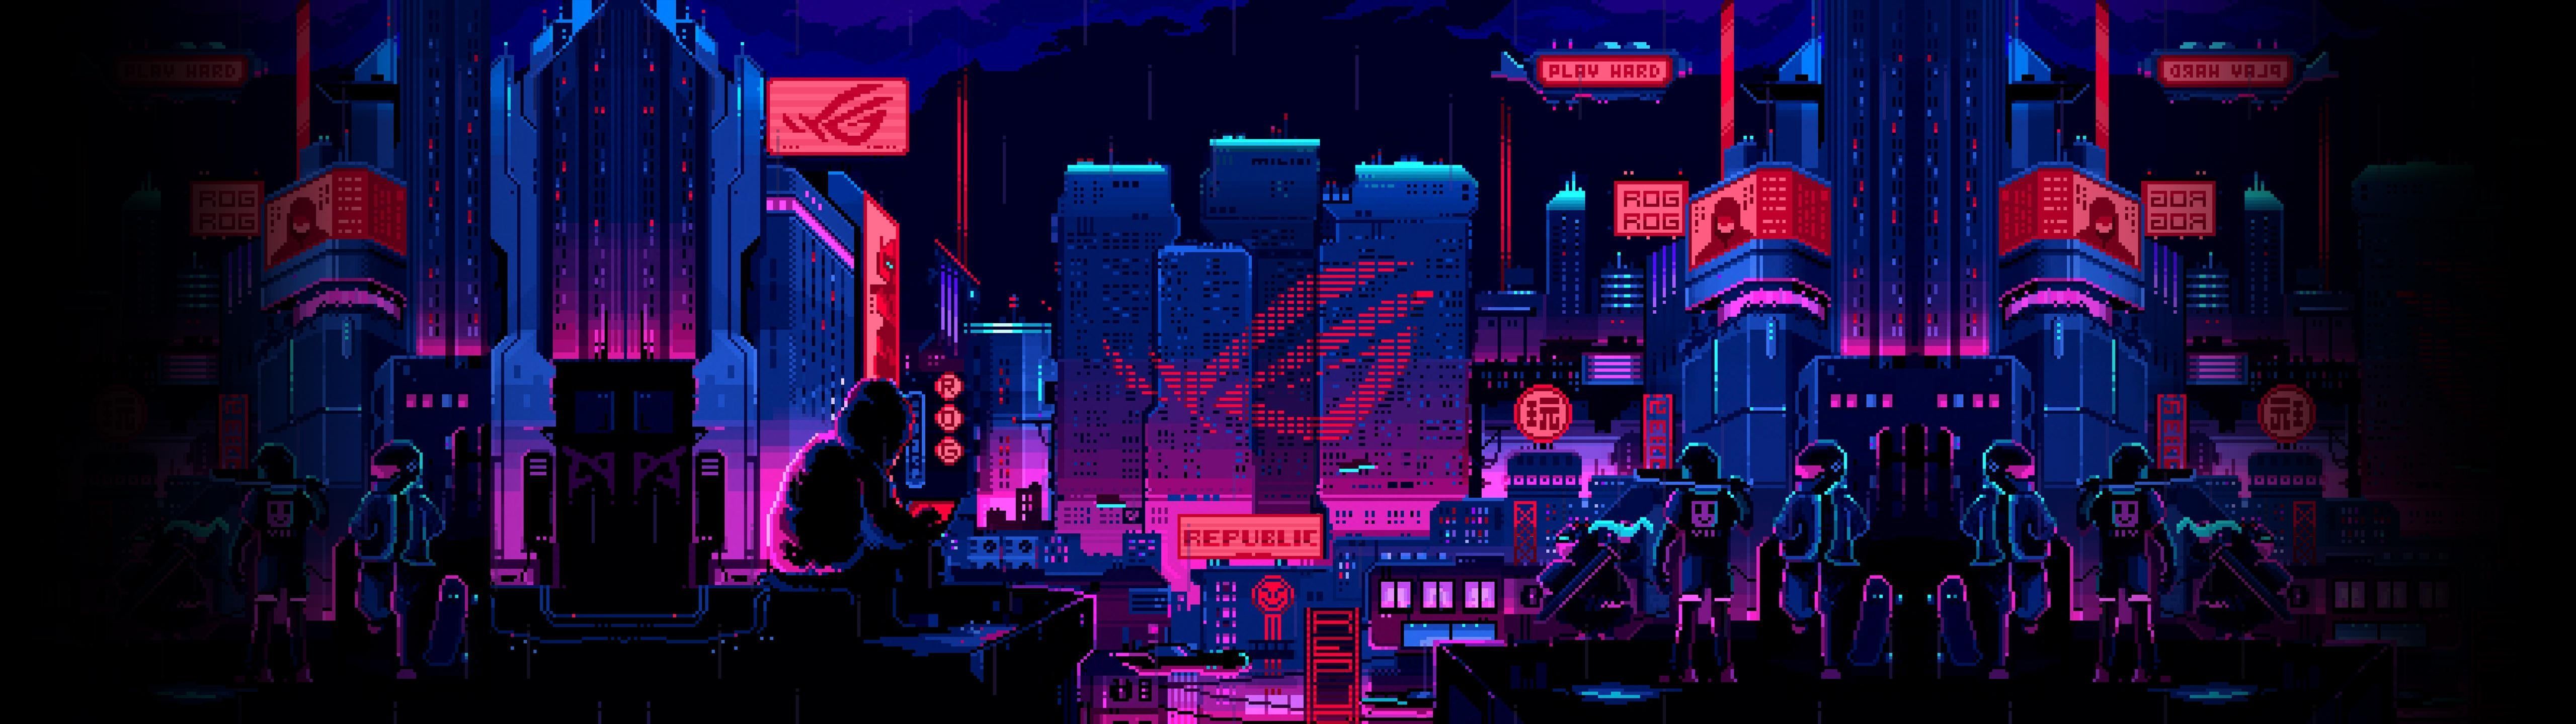 A cyberpunk city at night with neon lights and a group of people - 5120x1440